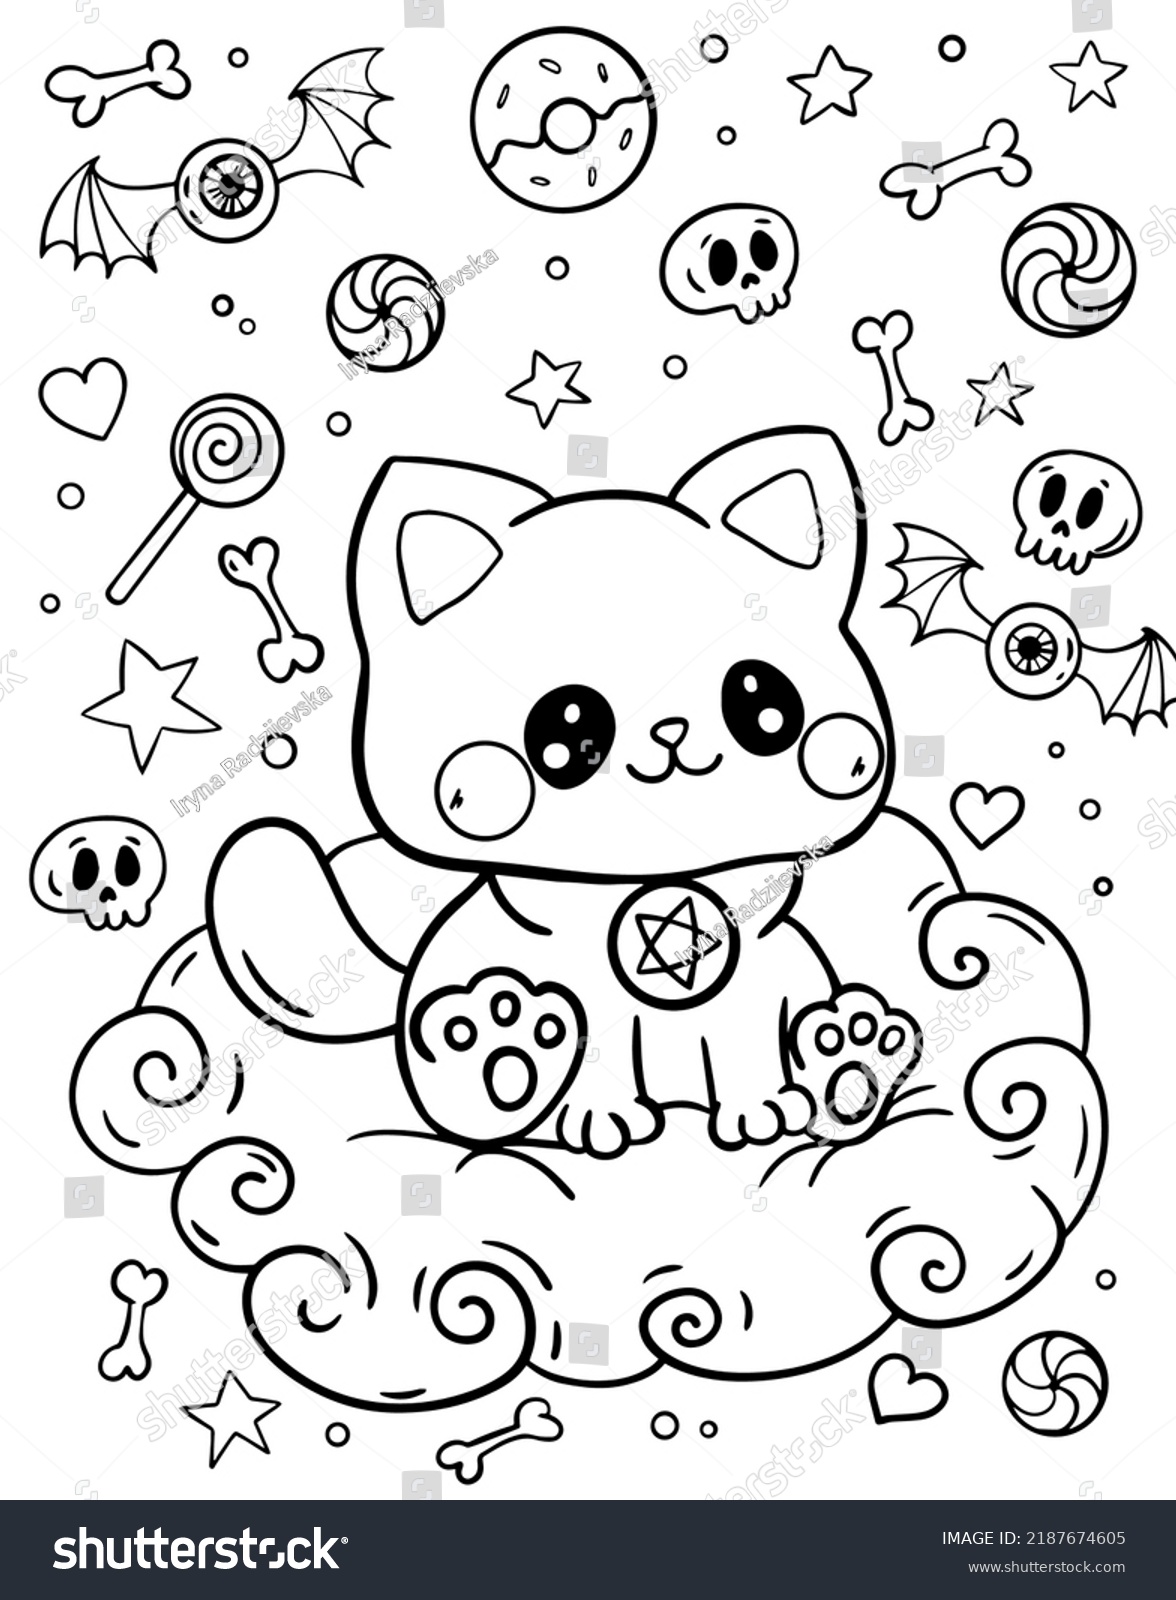 Kawaii Coloring Page Cat Sitting Clouds Stock Vector (Royalty Free ...